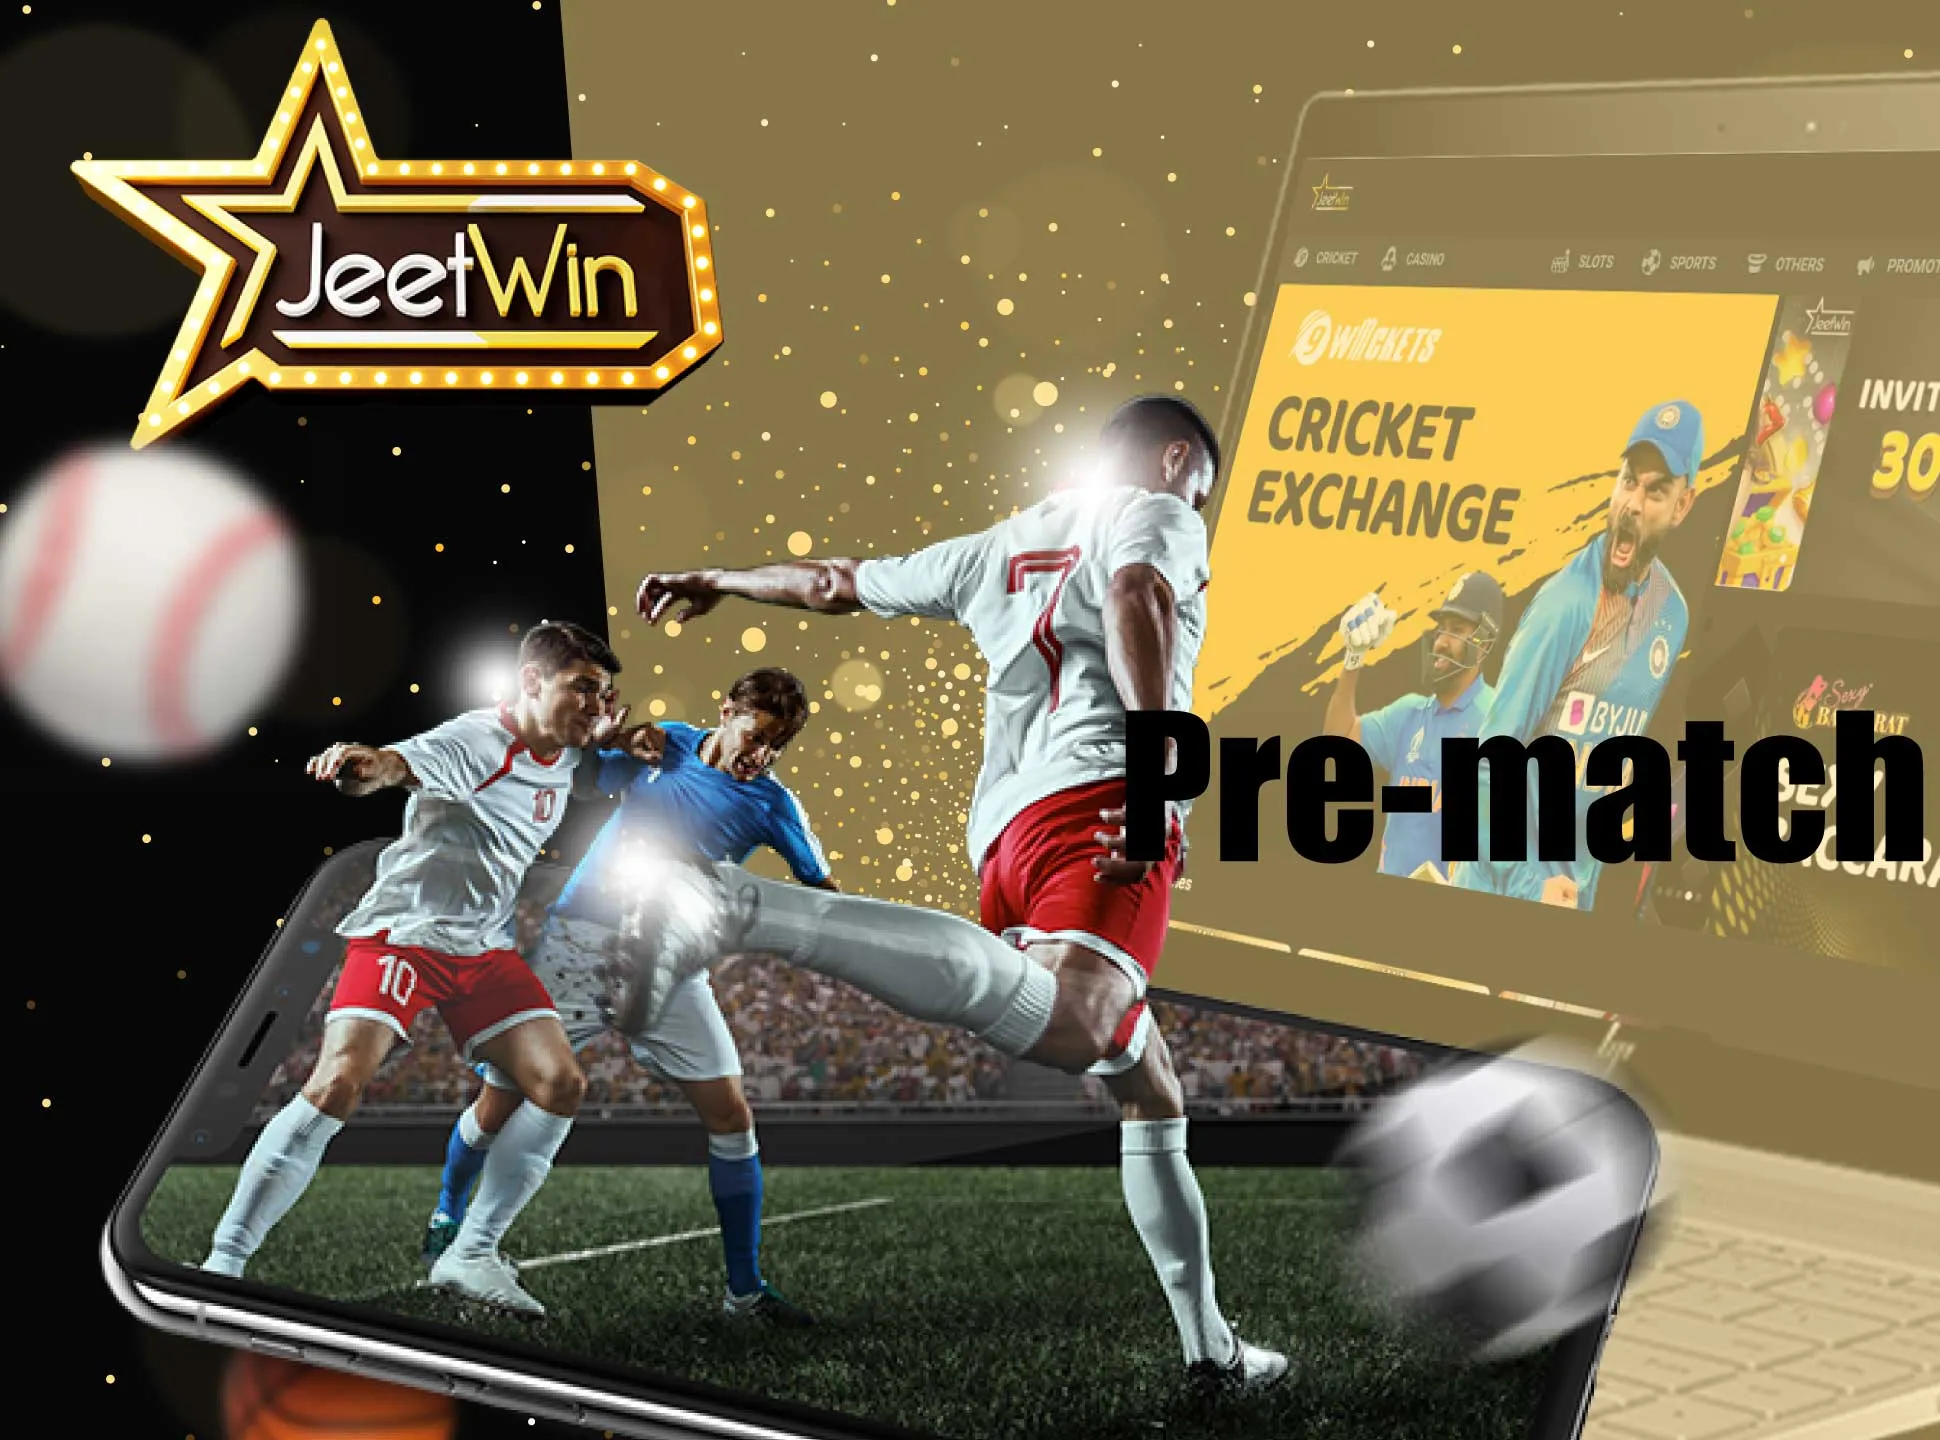 Prematch bets are available for bettors on Jeetwin.